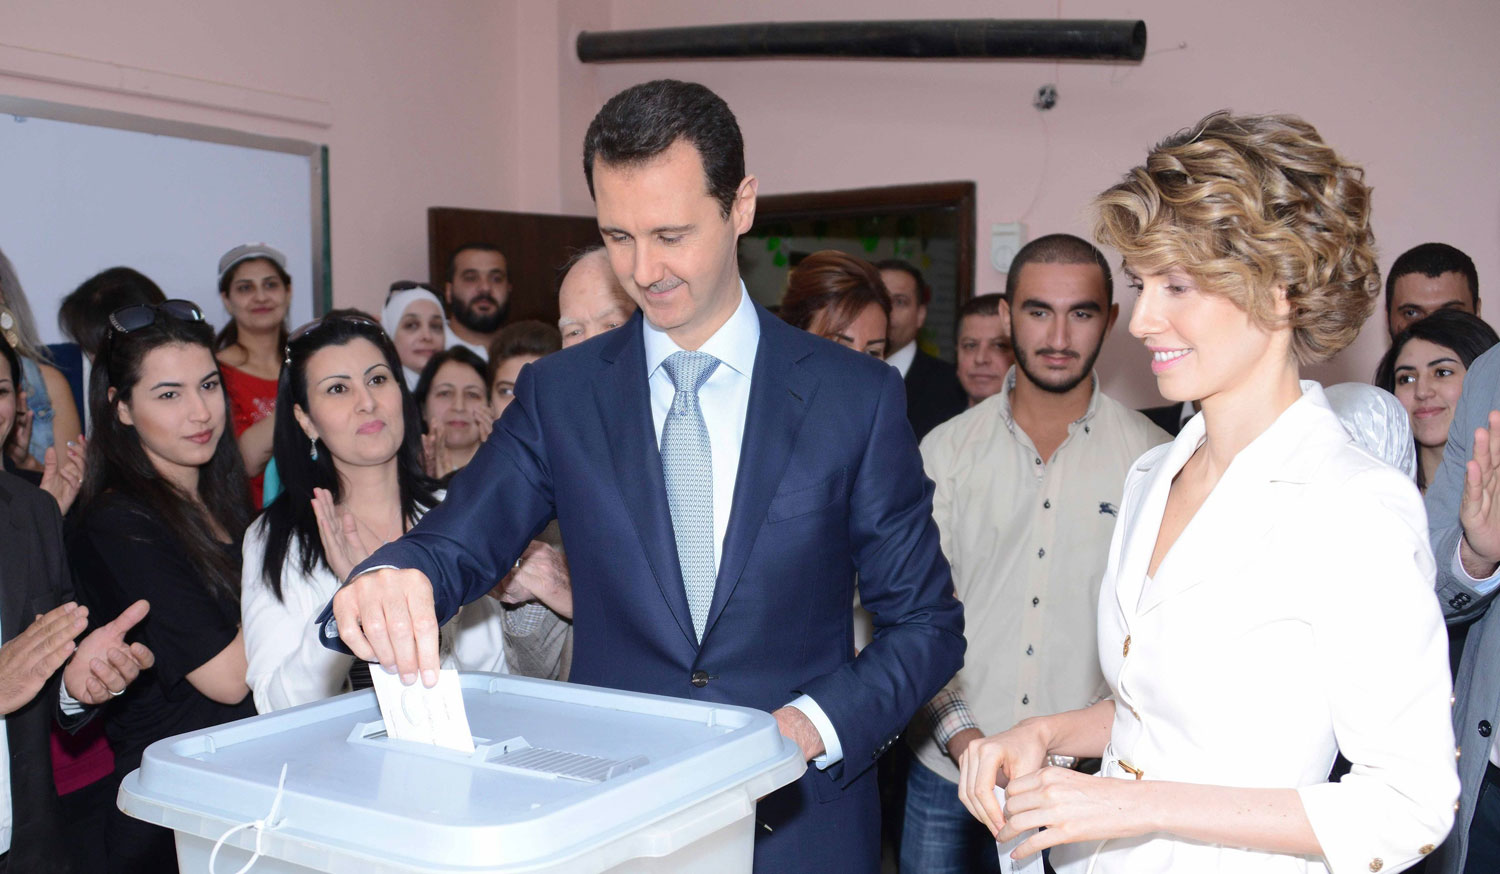 Syria's President Bashar al-Assad and his wife Asma cast their votes at a polling station in Damascus June 3, 2014.